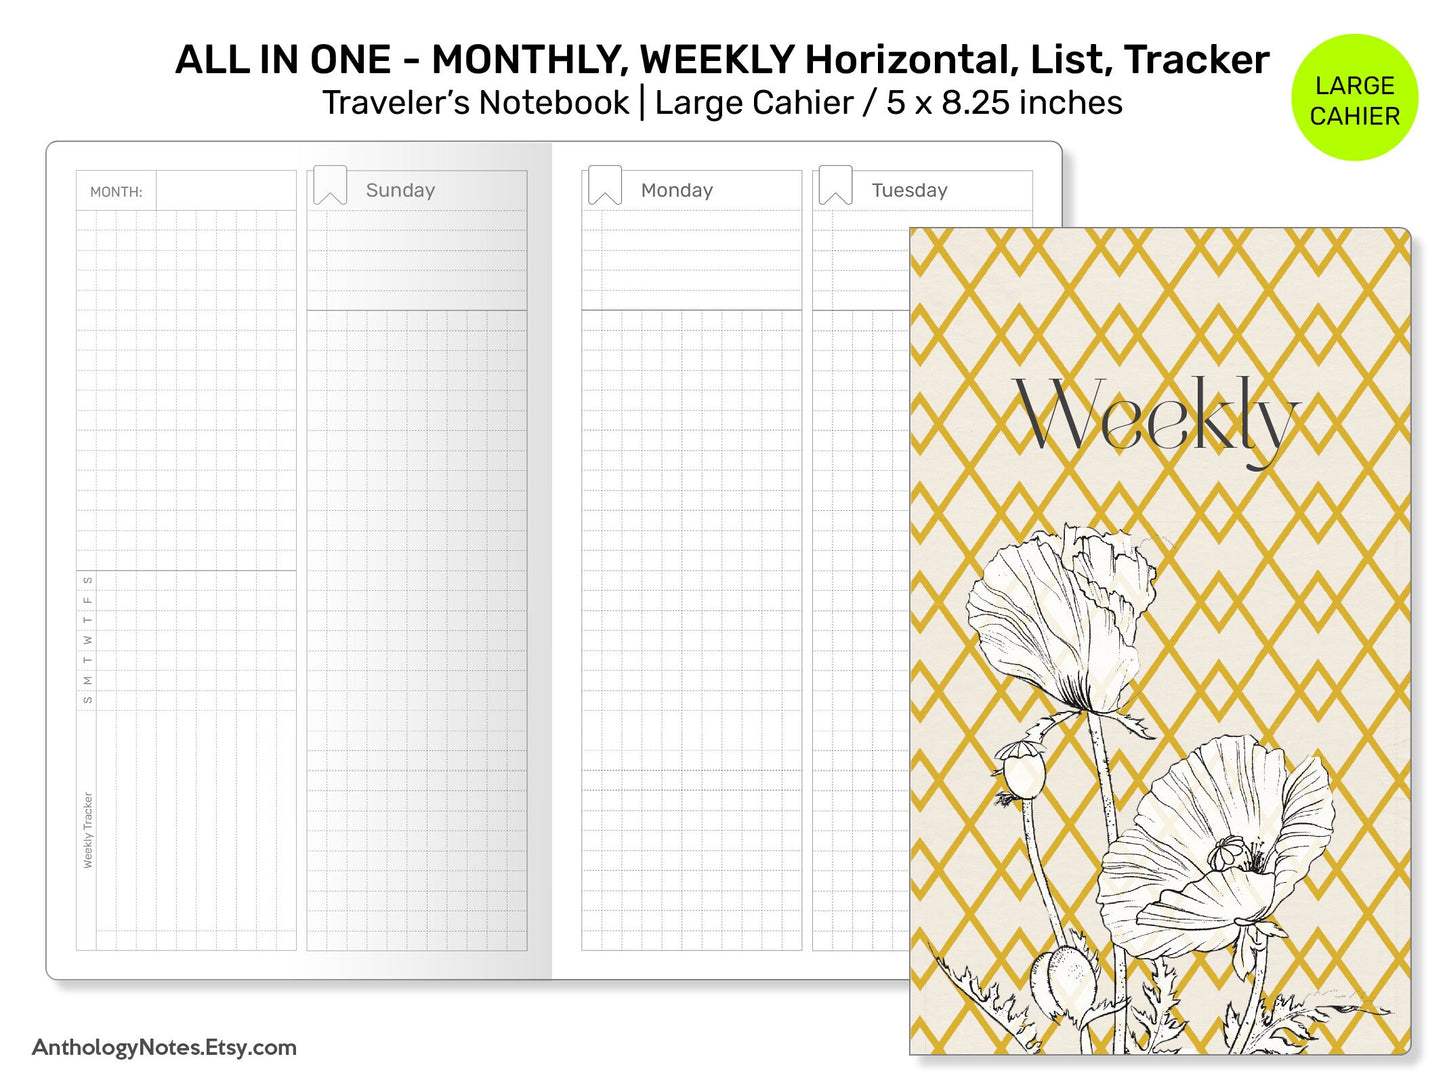 CAHIER TN Weekly GRID Insert Traveler's Notebook Vertical Wo4P Printable Planner with Tracker MCL003